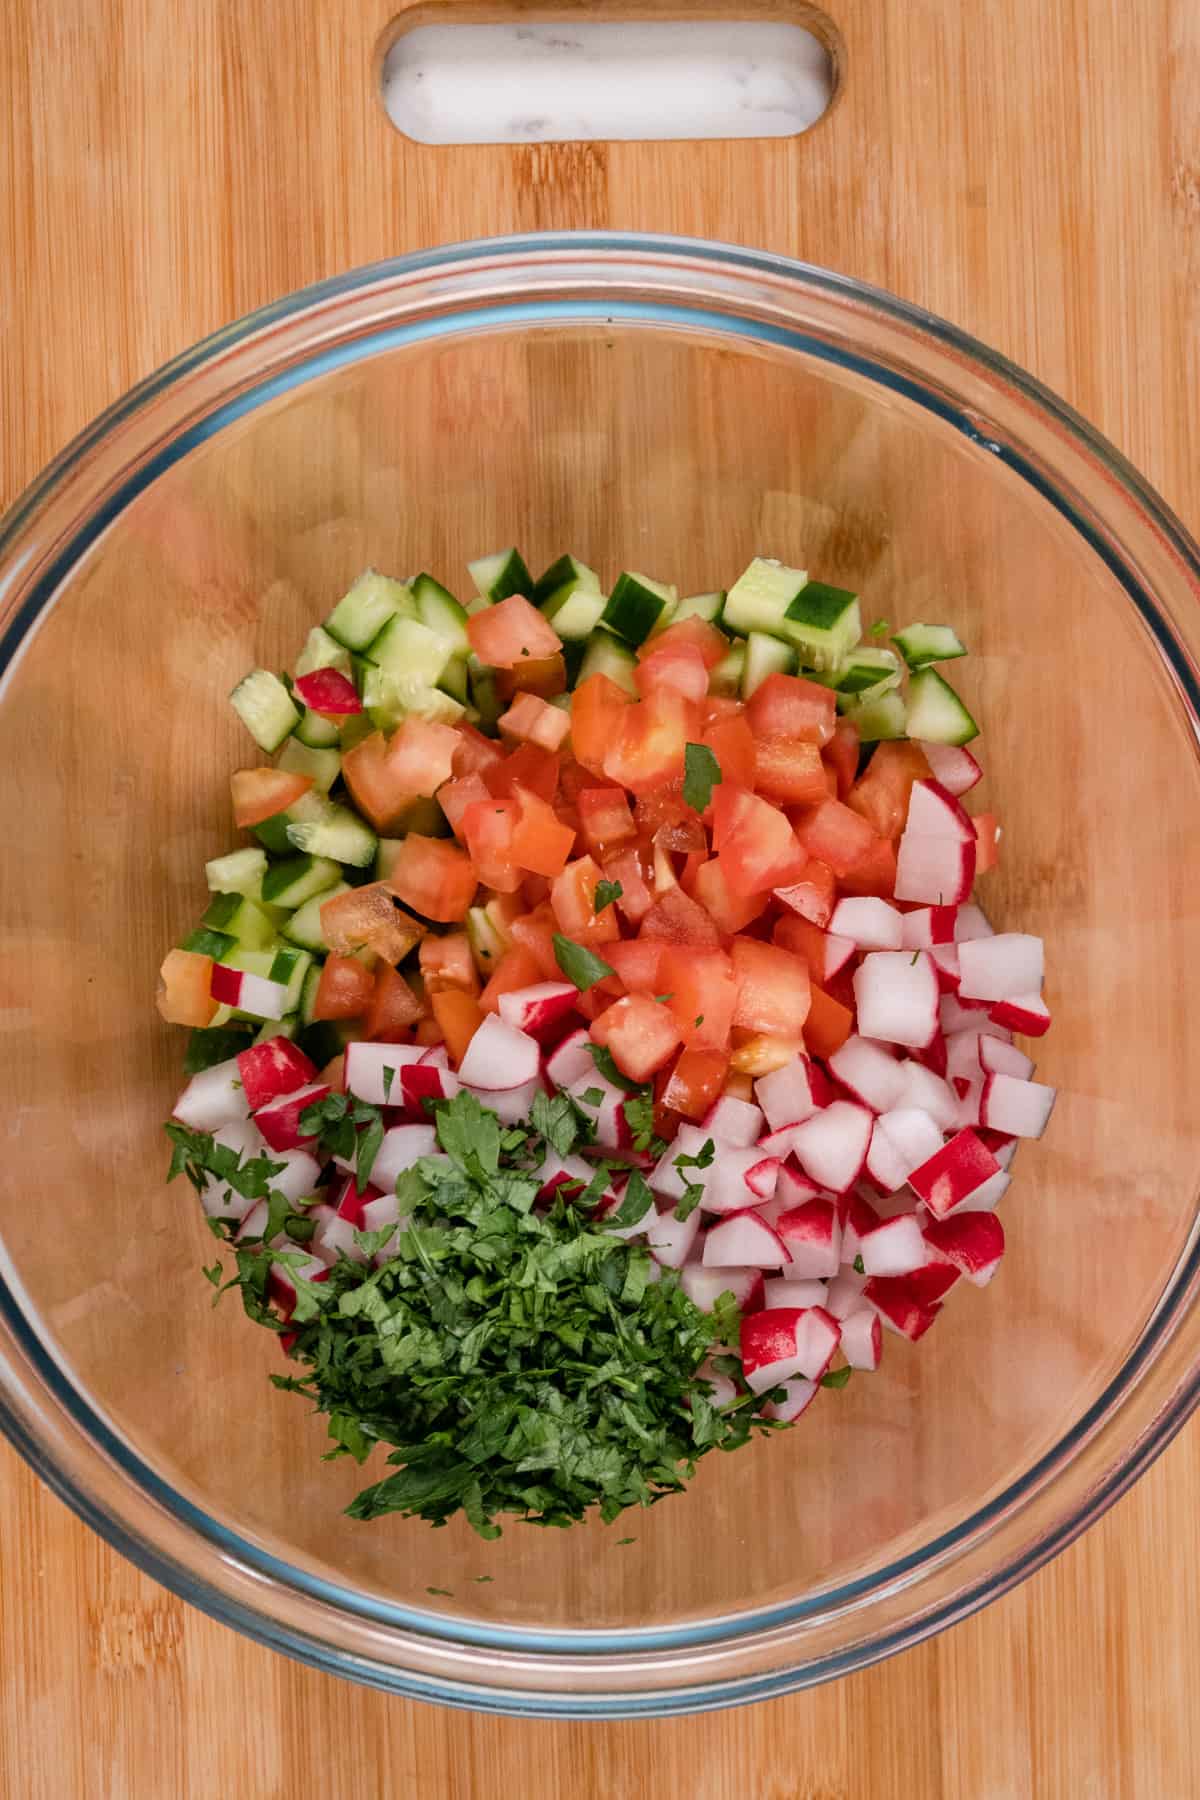 diced tomato, radish, parsley and cucumber in a bowl